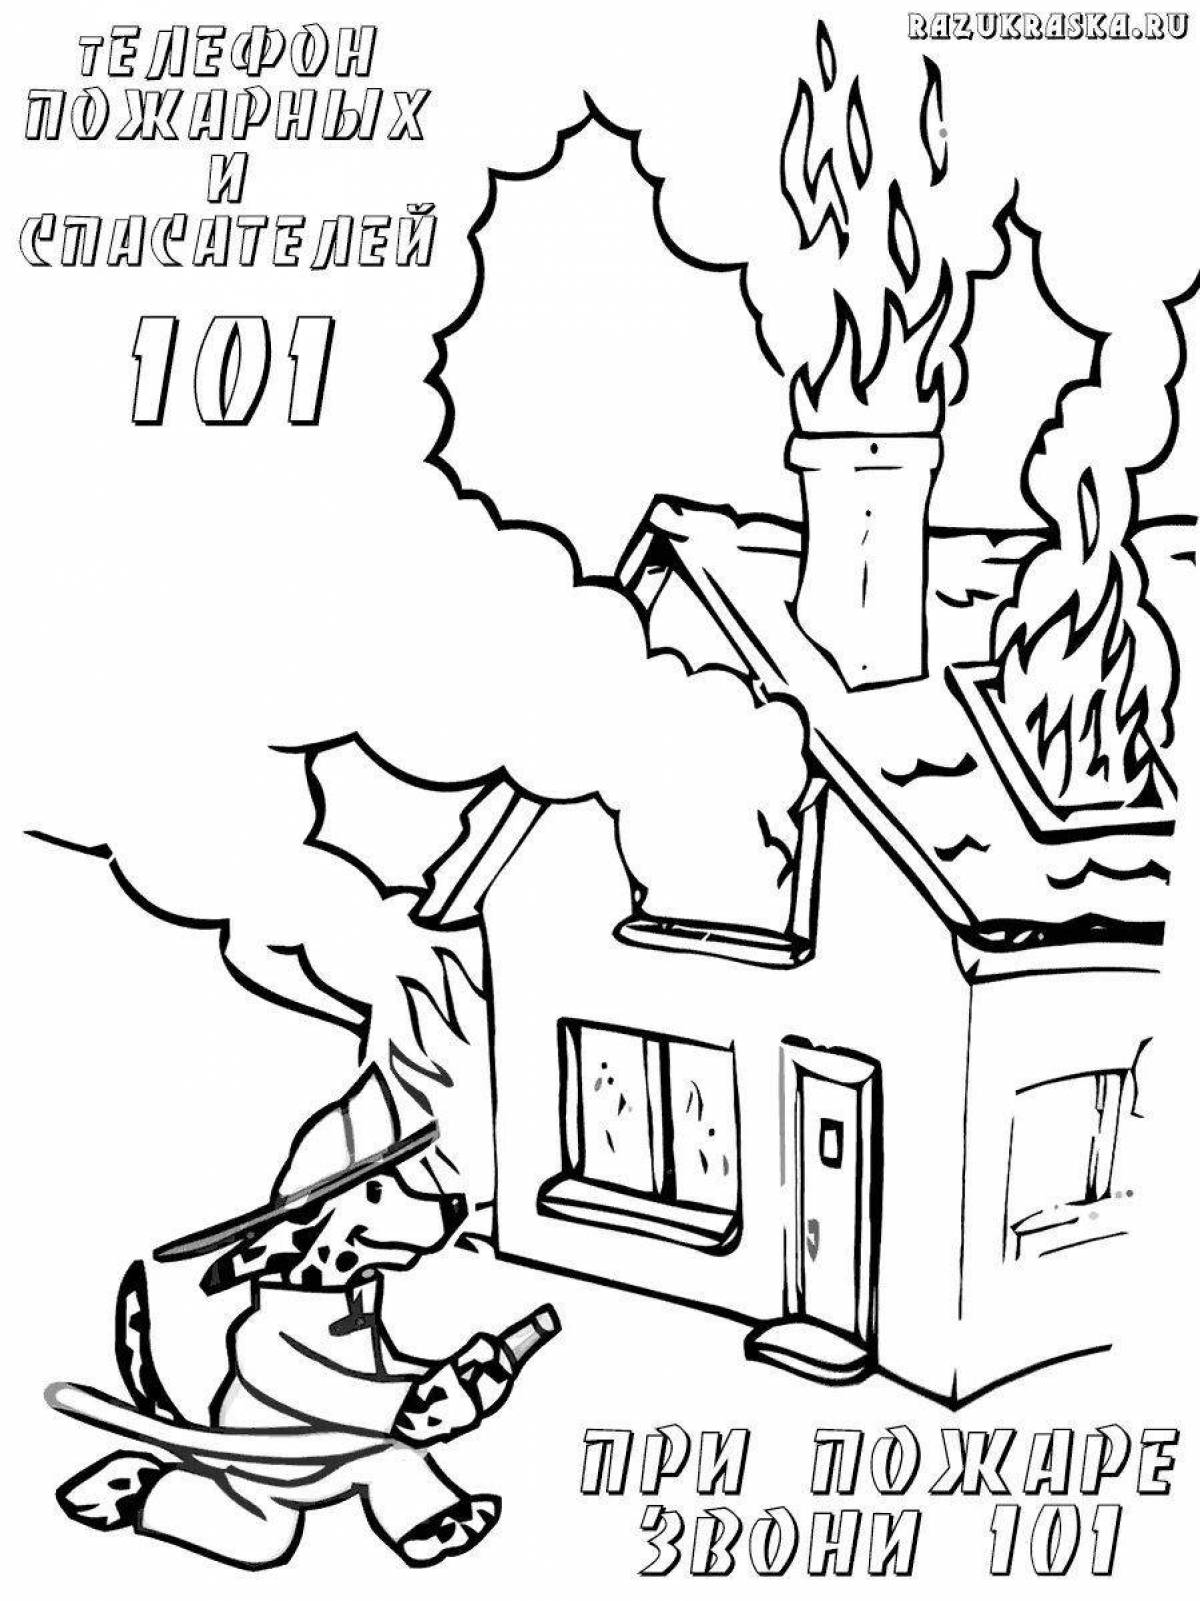 Colorful fire safety coloring page